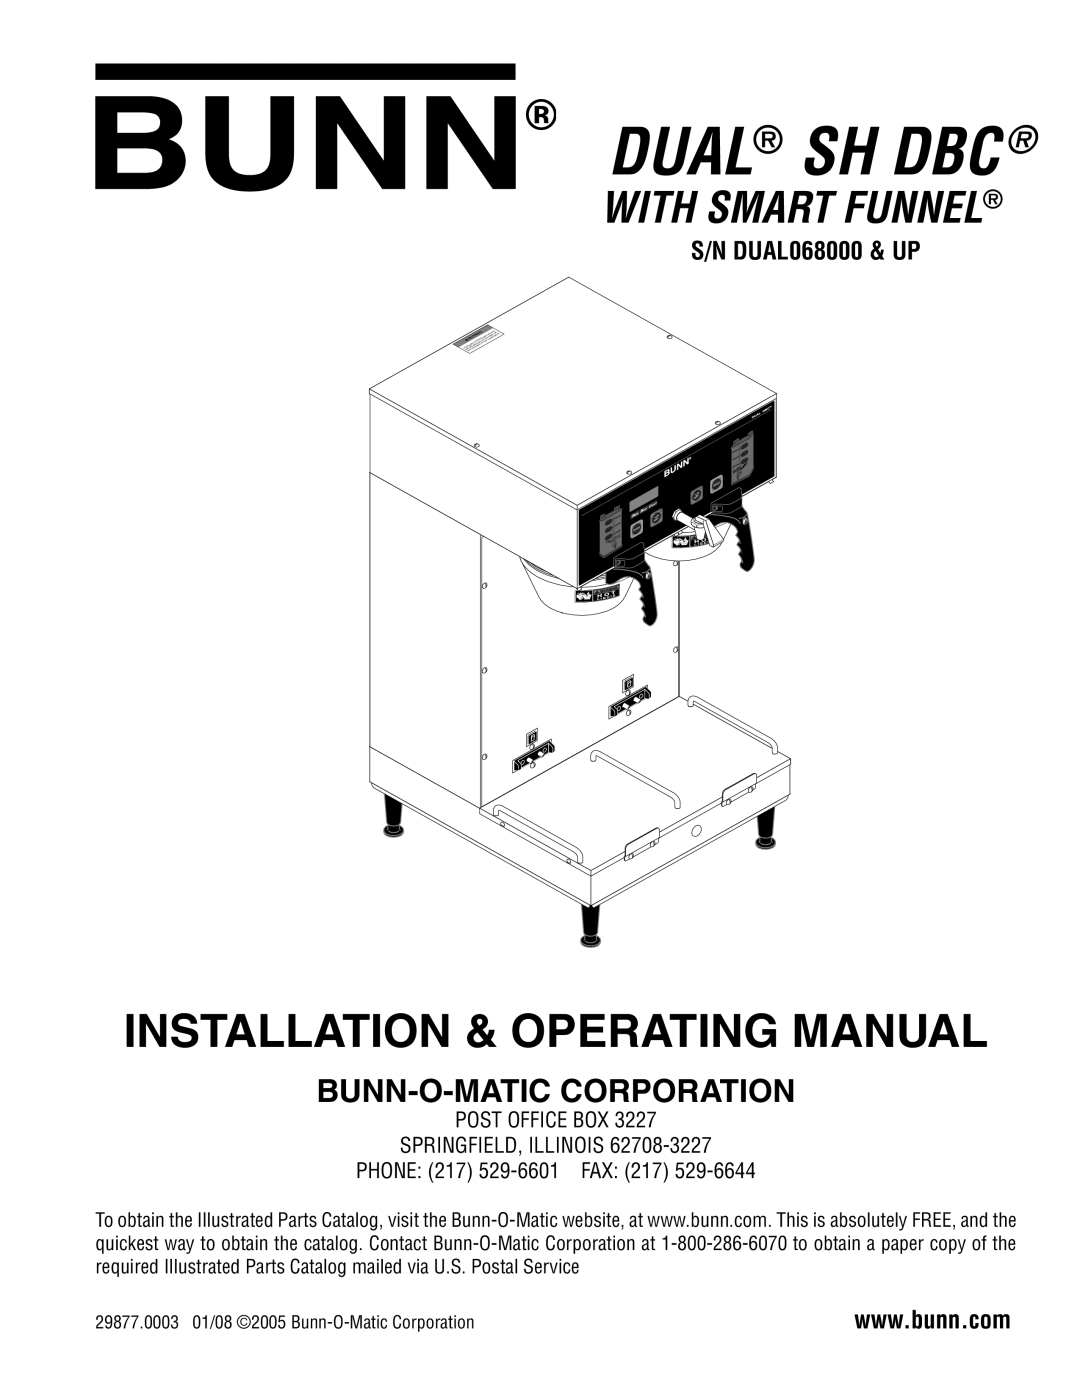 Bunn manual S/N DUAL068000 & UP, Dual Sh Dbc, Installation & Operating Manual, With Smart Funnel 